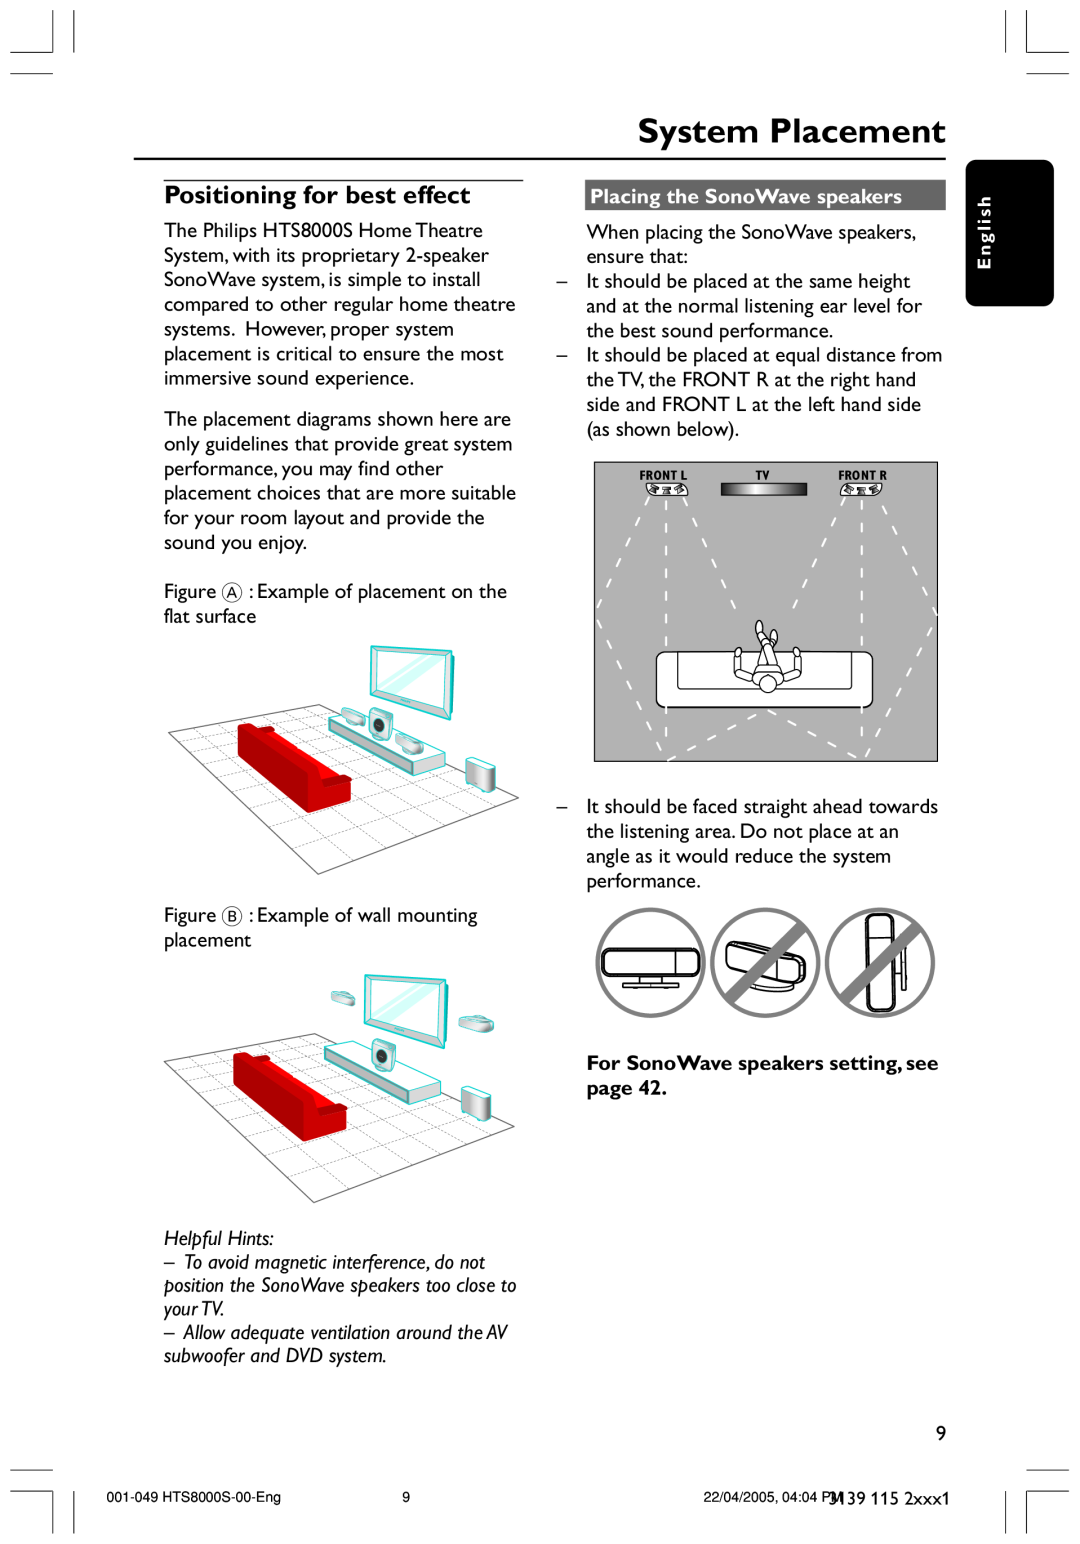 Philips HTS8000S user manual System Placement, Positioning for best effect, Placing the SonoWave speakers, Helpful Hints 